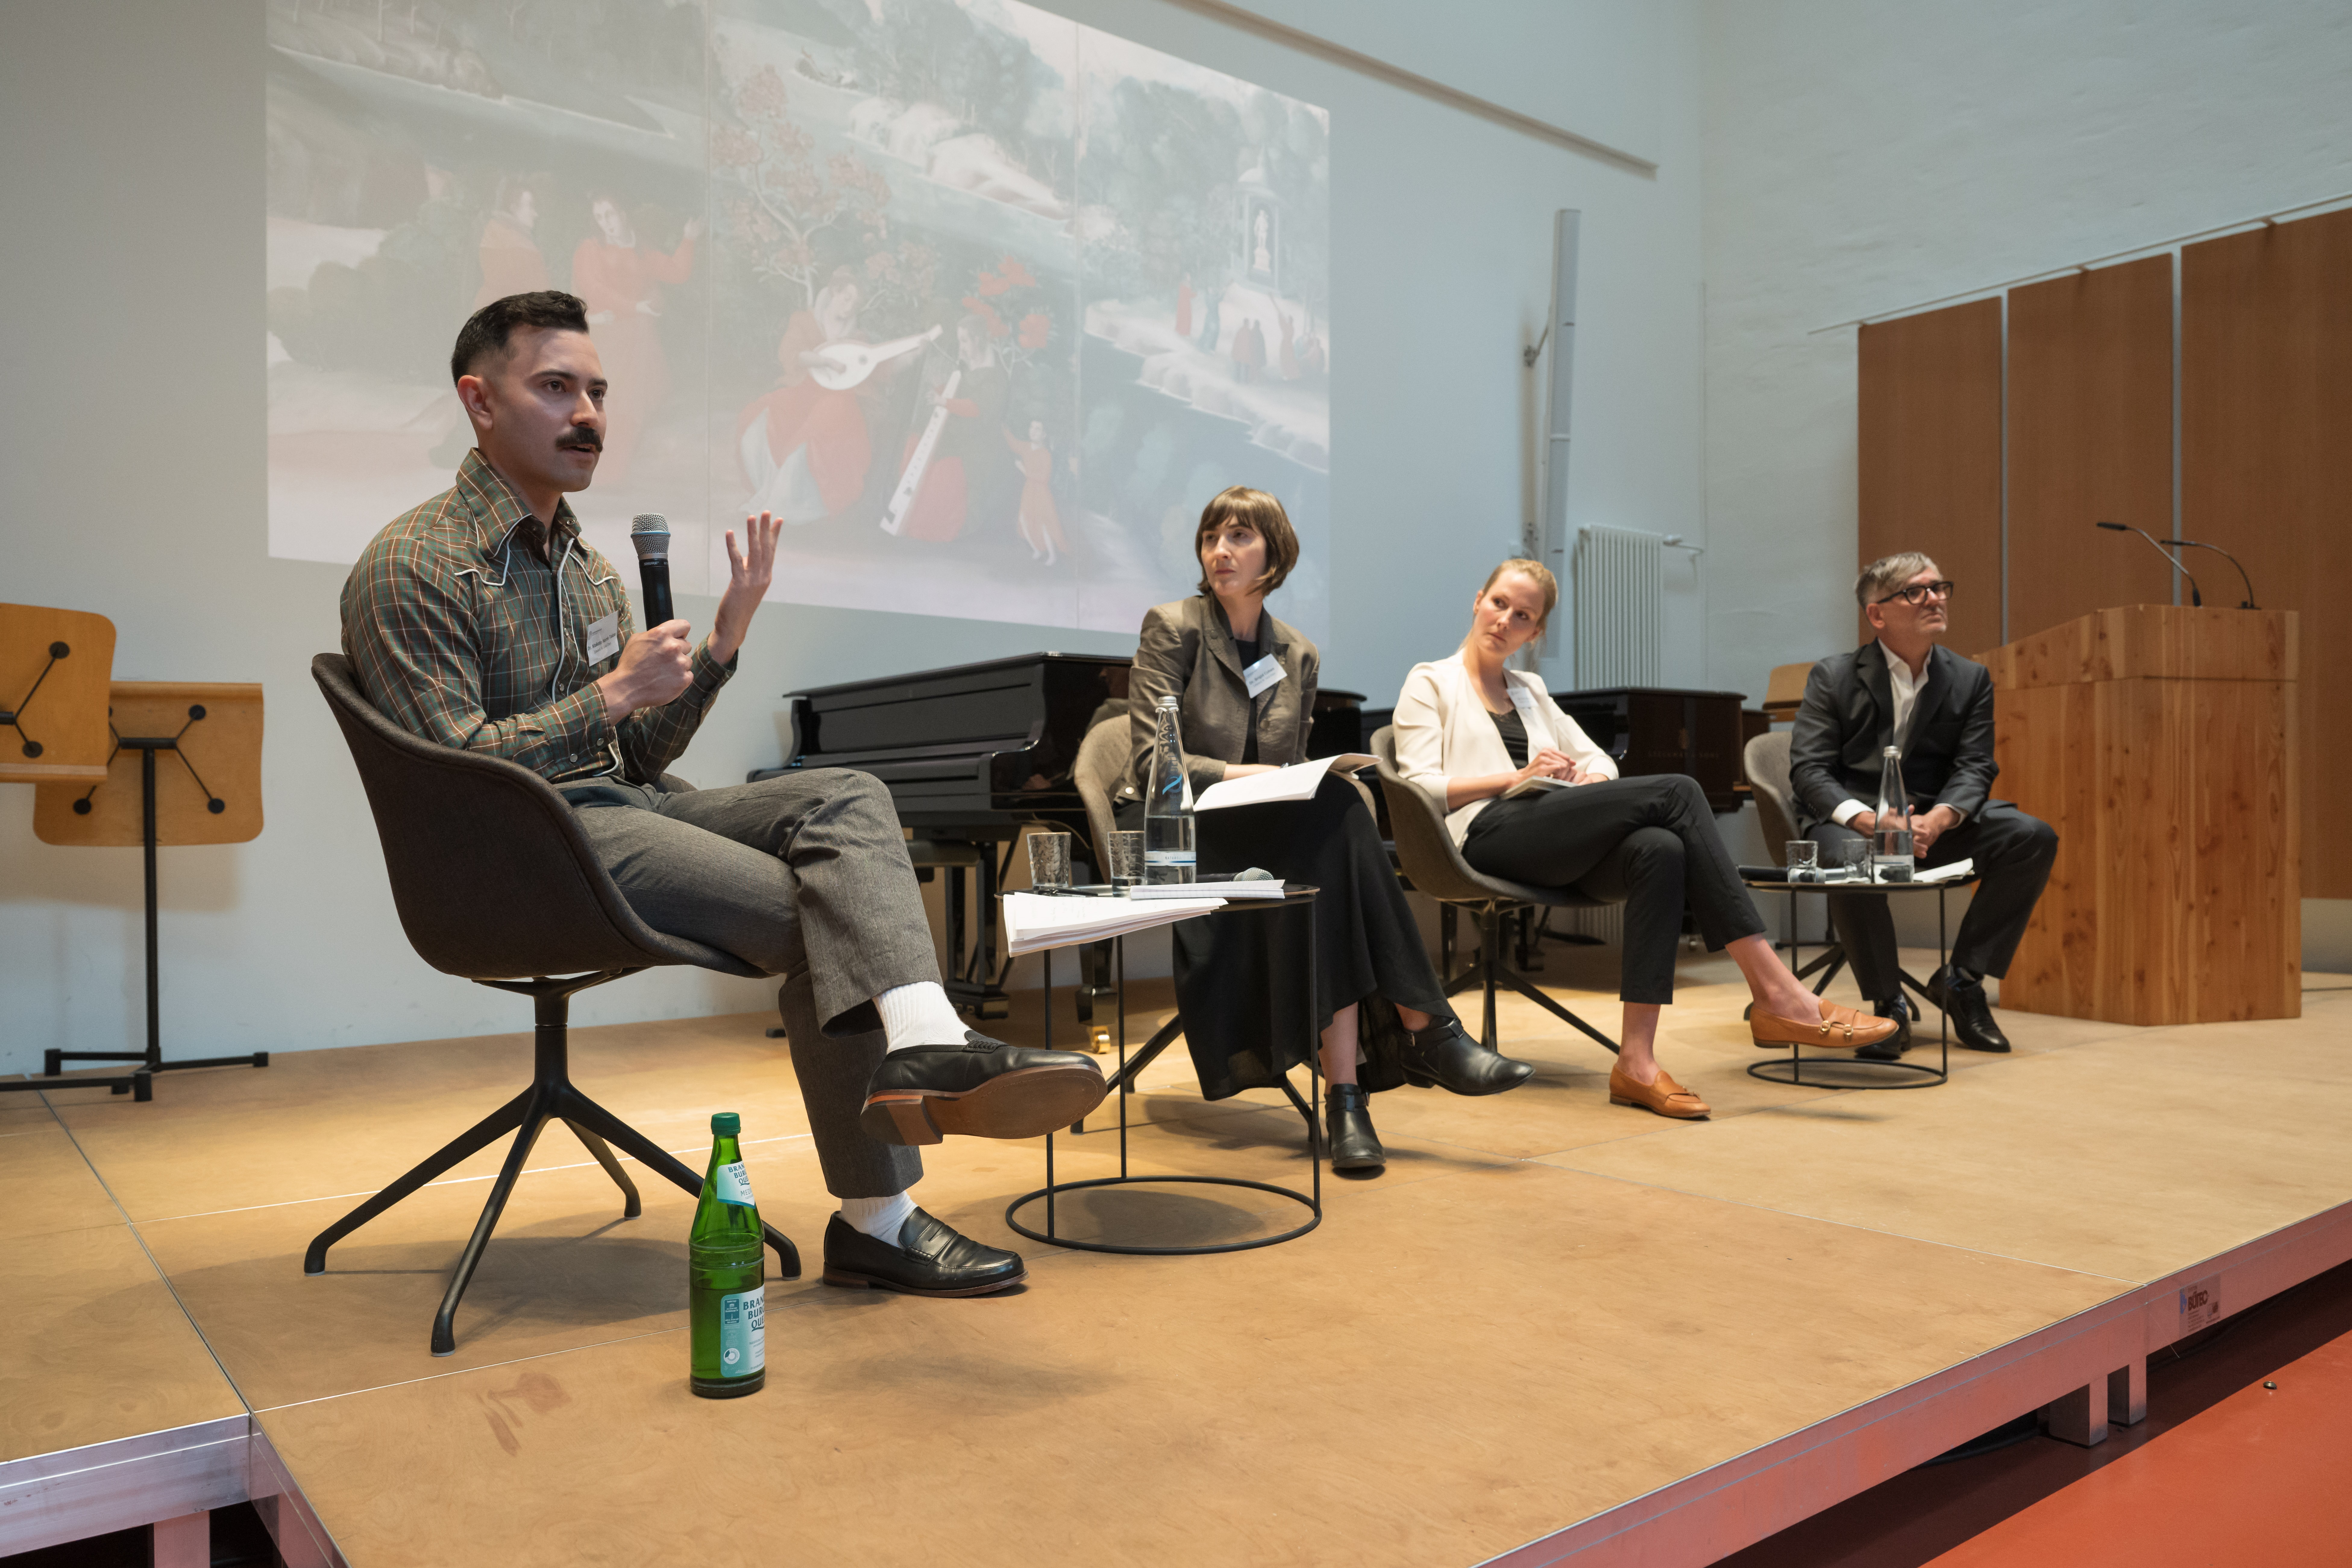 Dr. Makoto Harris Takao, University of Illinois, Professor Brigid Cohen, New York University, Dr. Clara Wenz, University of Wurzburg, and Professor James Helgeson discussed music in the context of global colonial contact (image: Peter Adamik)